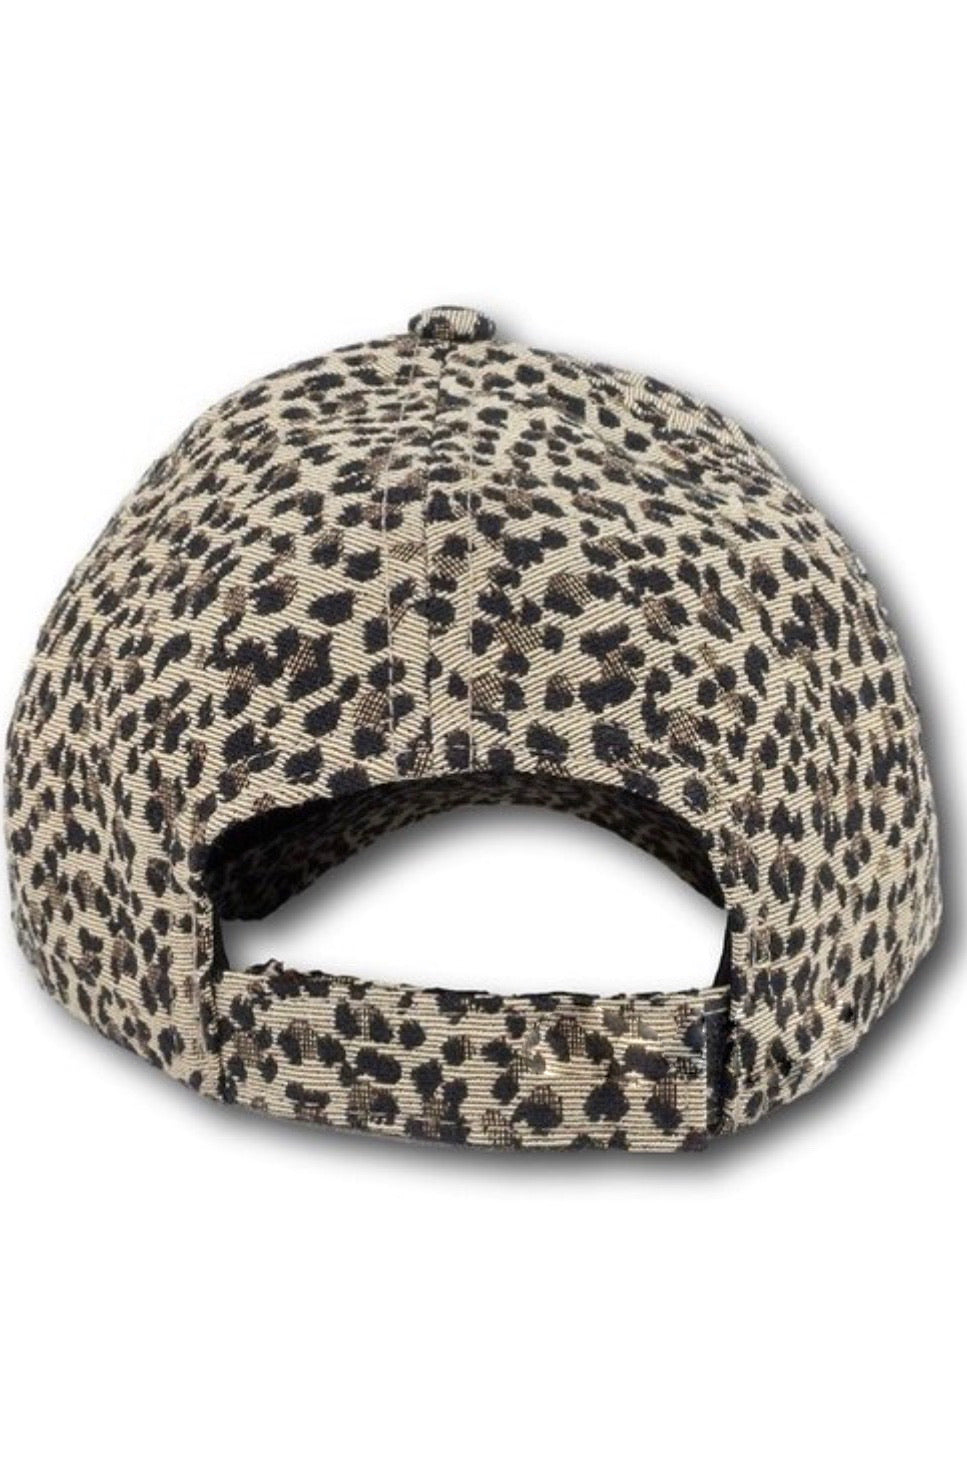 Leopard Print Cap - Corinne an Affordable Women's Clothing Boutique in the US USA